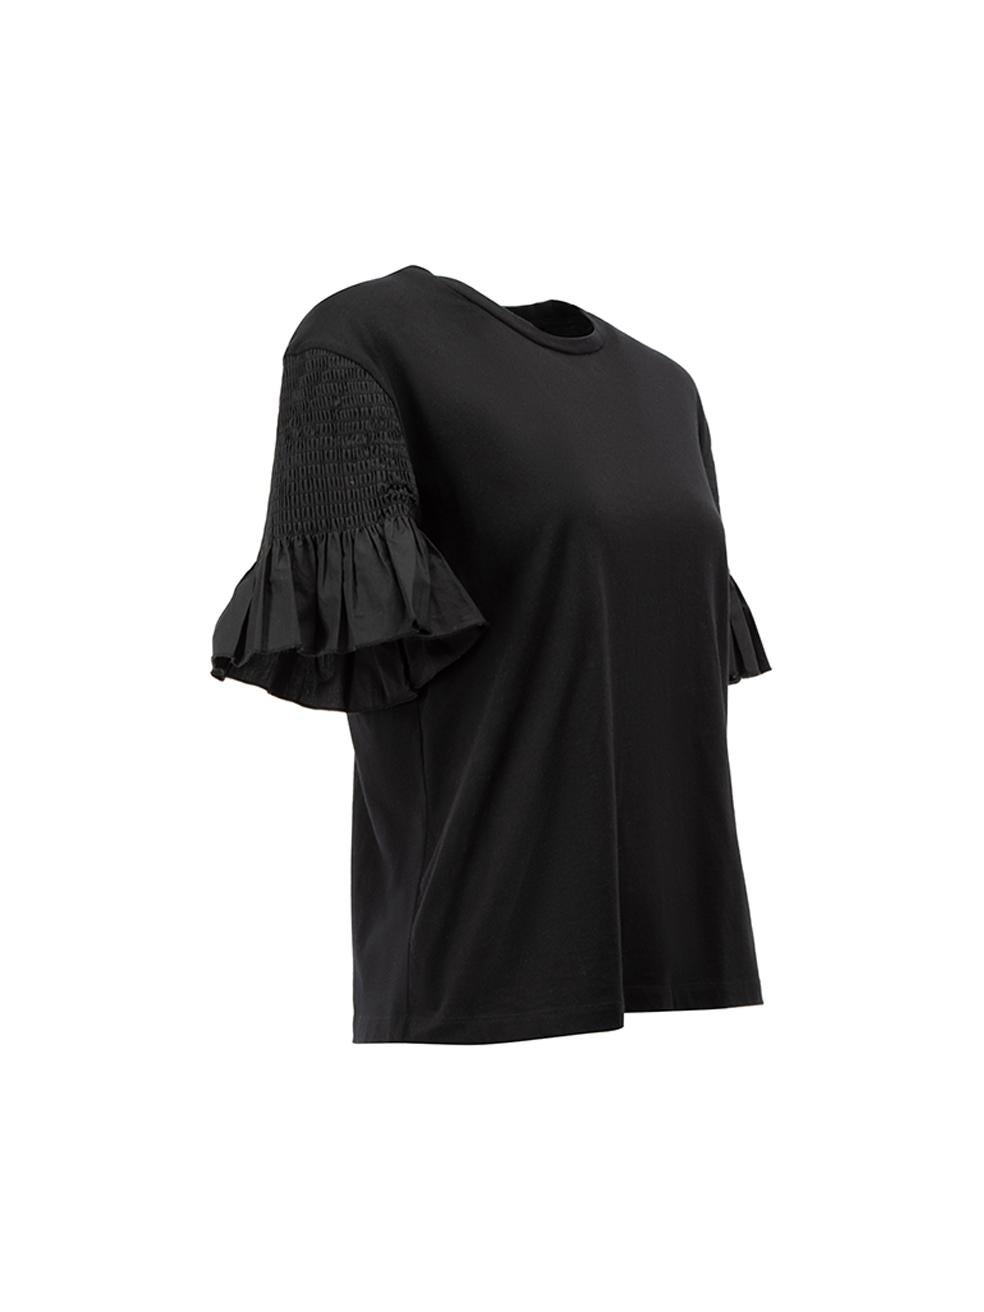 CONDITION is Very good. Minimal wear to t-shirt is evident. Minimal wear to the neckline where marks can be seen on this used Maje designer resale item. 
 
 Details
  Black
 Cotton
 T shirt
 Round neckline
 Short sleeves with shirring detail
 
 
